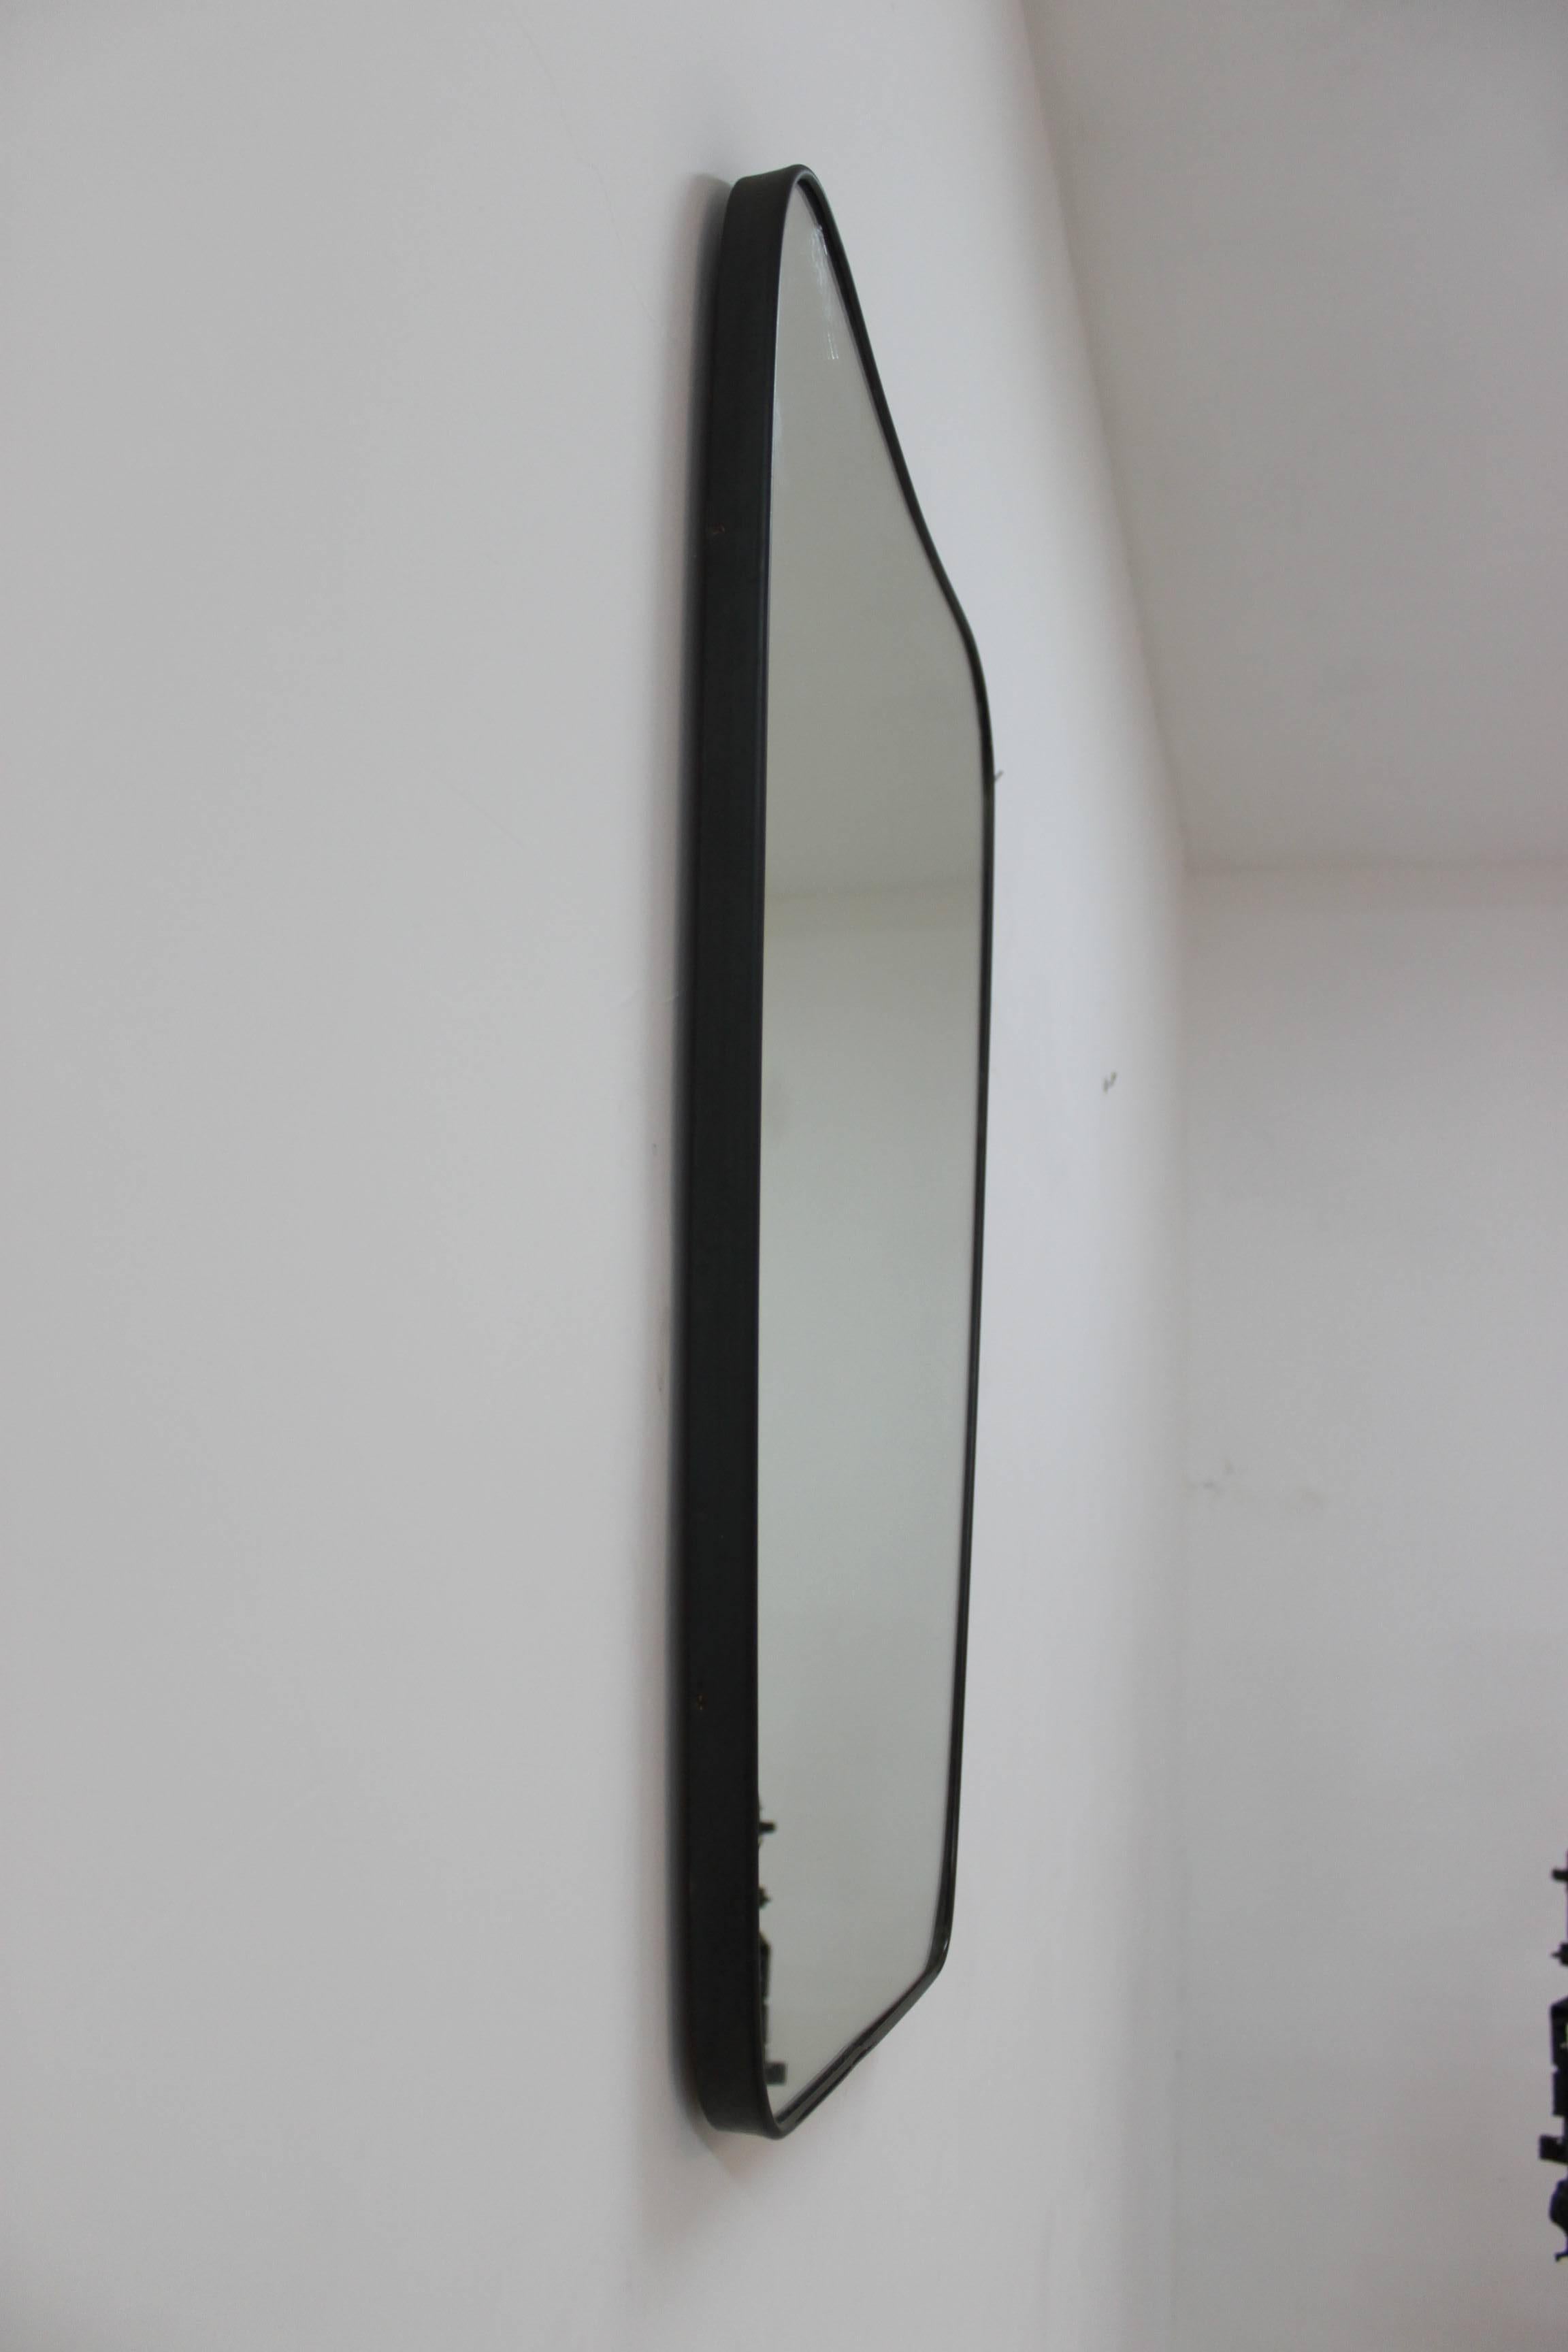 Mirror in the style of Gio Ponti
Brass details
circa 1940.